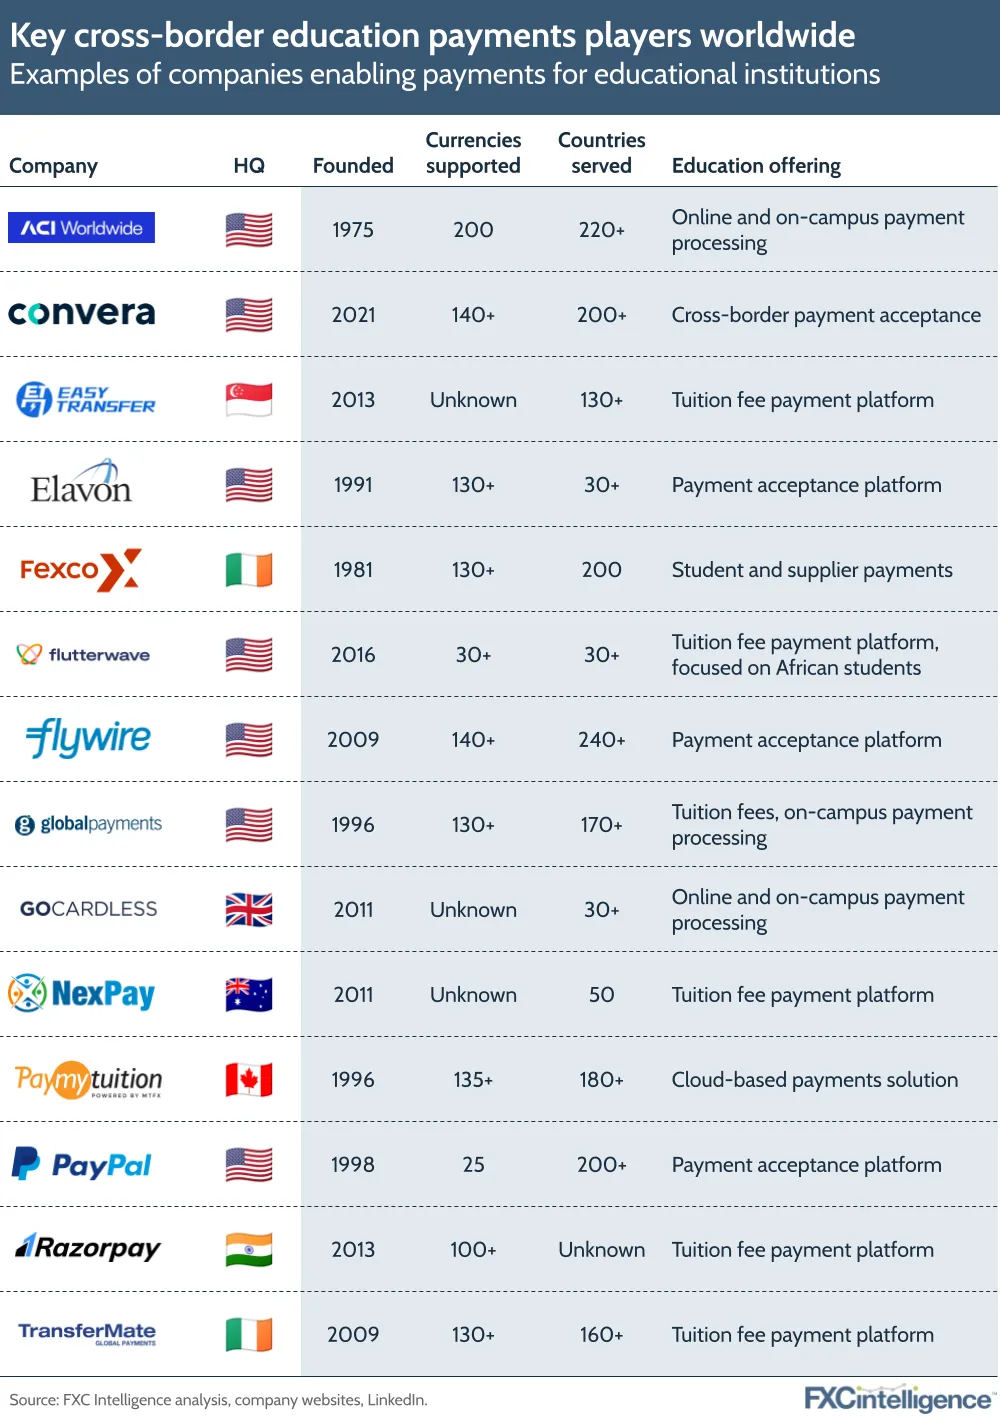 Key cross-border education payments players worldwide
Examples of companies enabling payments for educational institutions